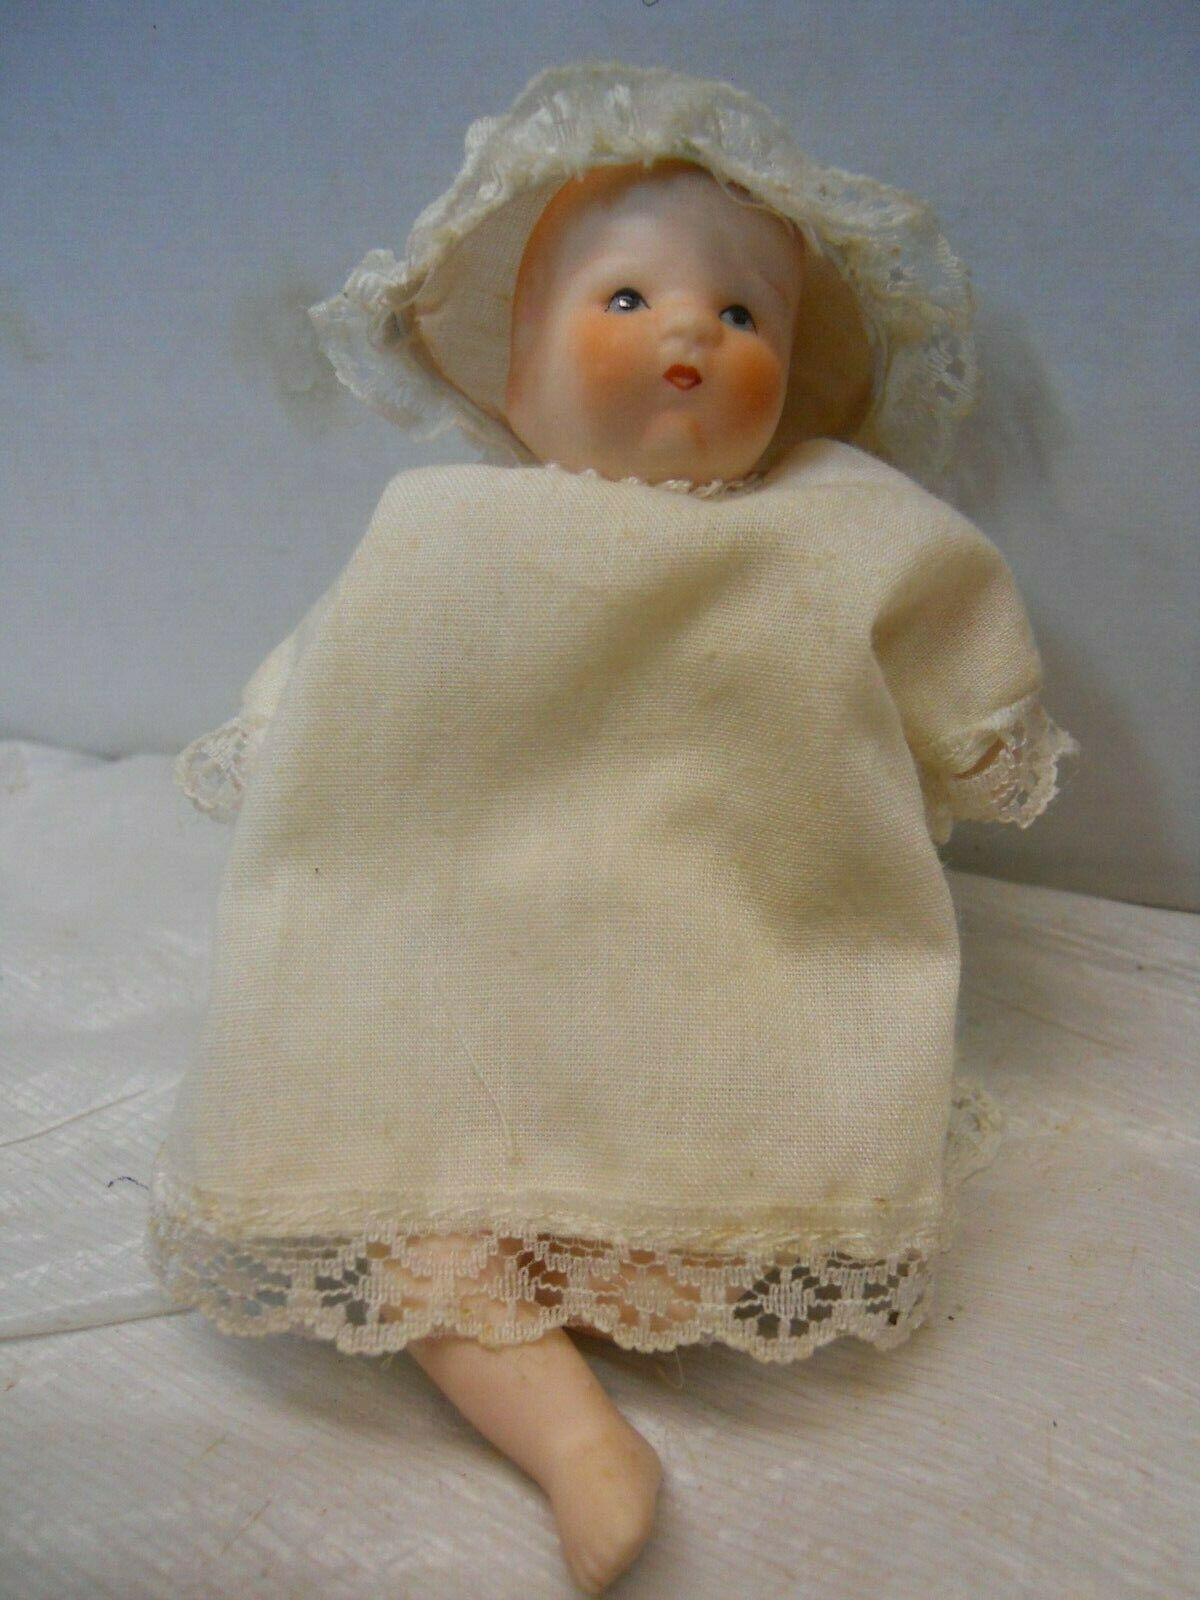 Vintage Russ Bisque Doll Cloth Body, Bisque Arms, Legs & Head Clothing By Russ